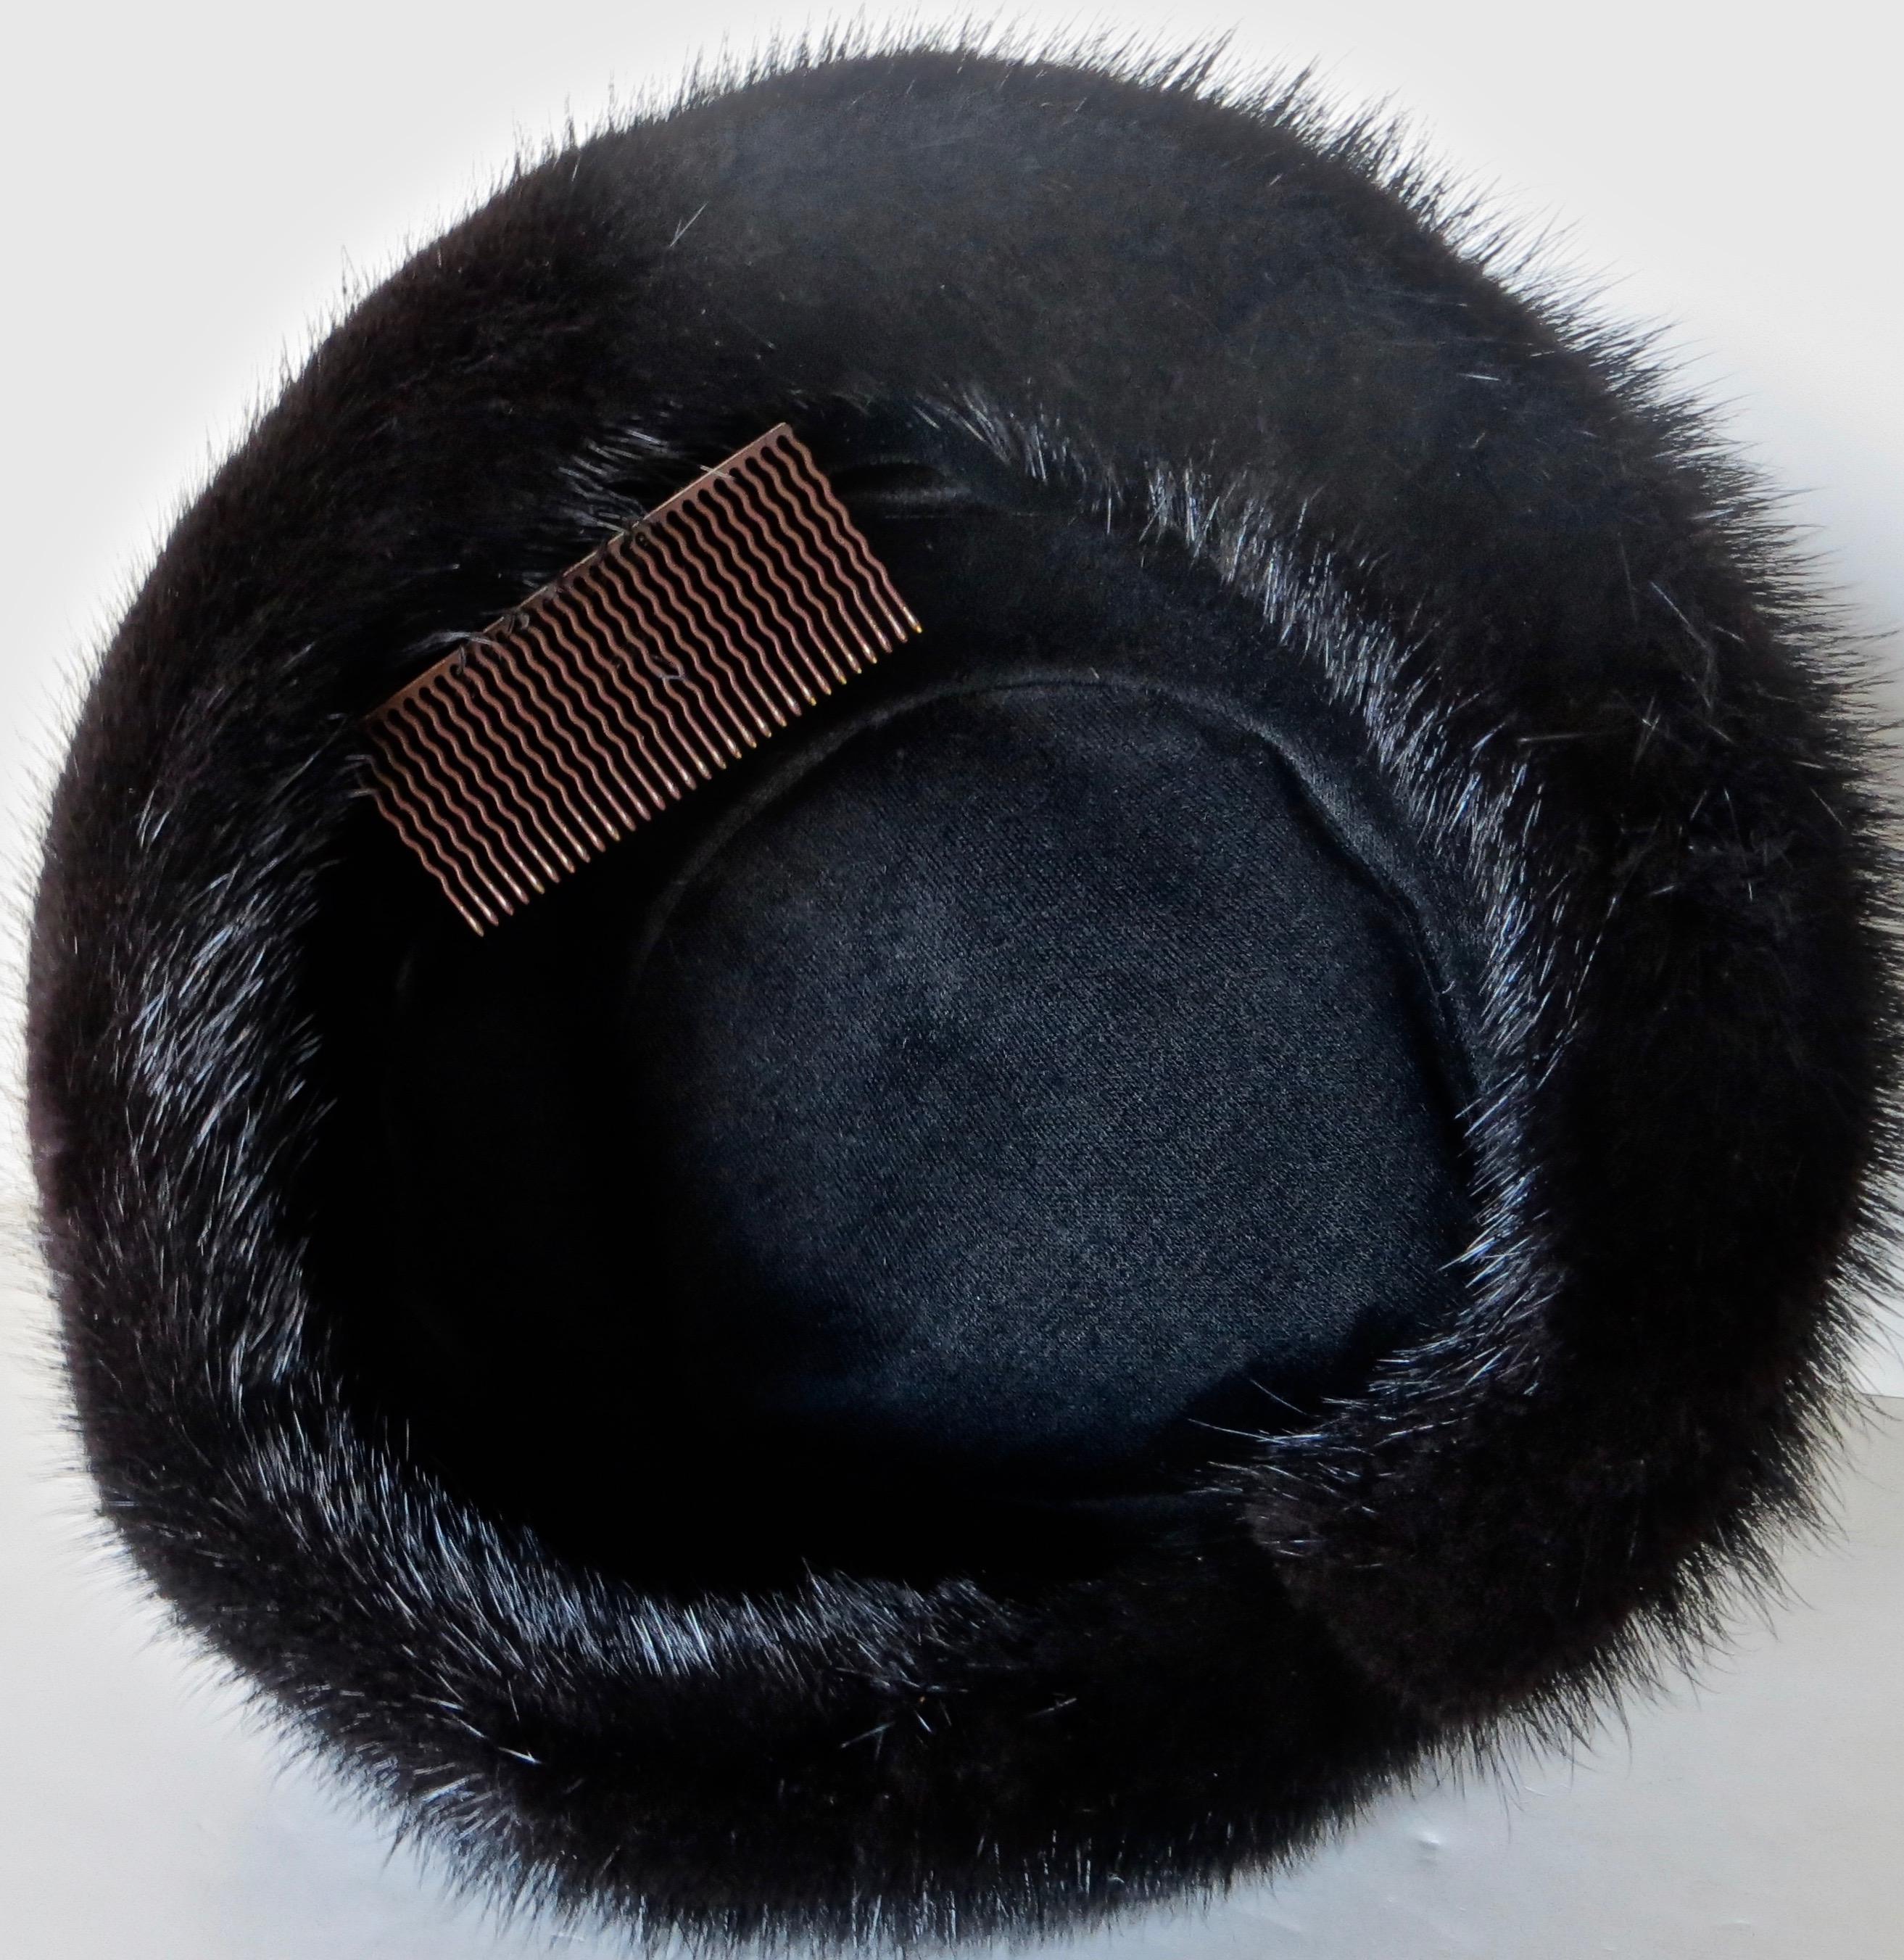 Well made black mink hat designed and sold by I. Magnin & Company in the mid 1960's. The style, undoubtedly worn and made popular by Julie Christie in the movie 